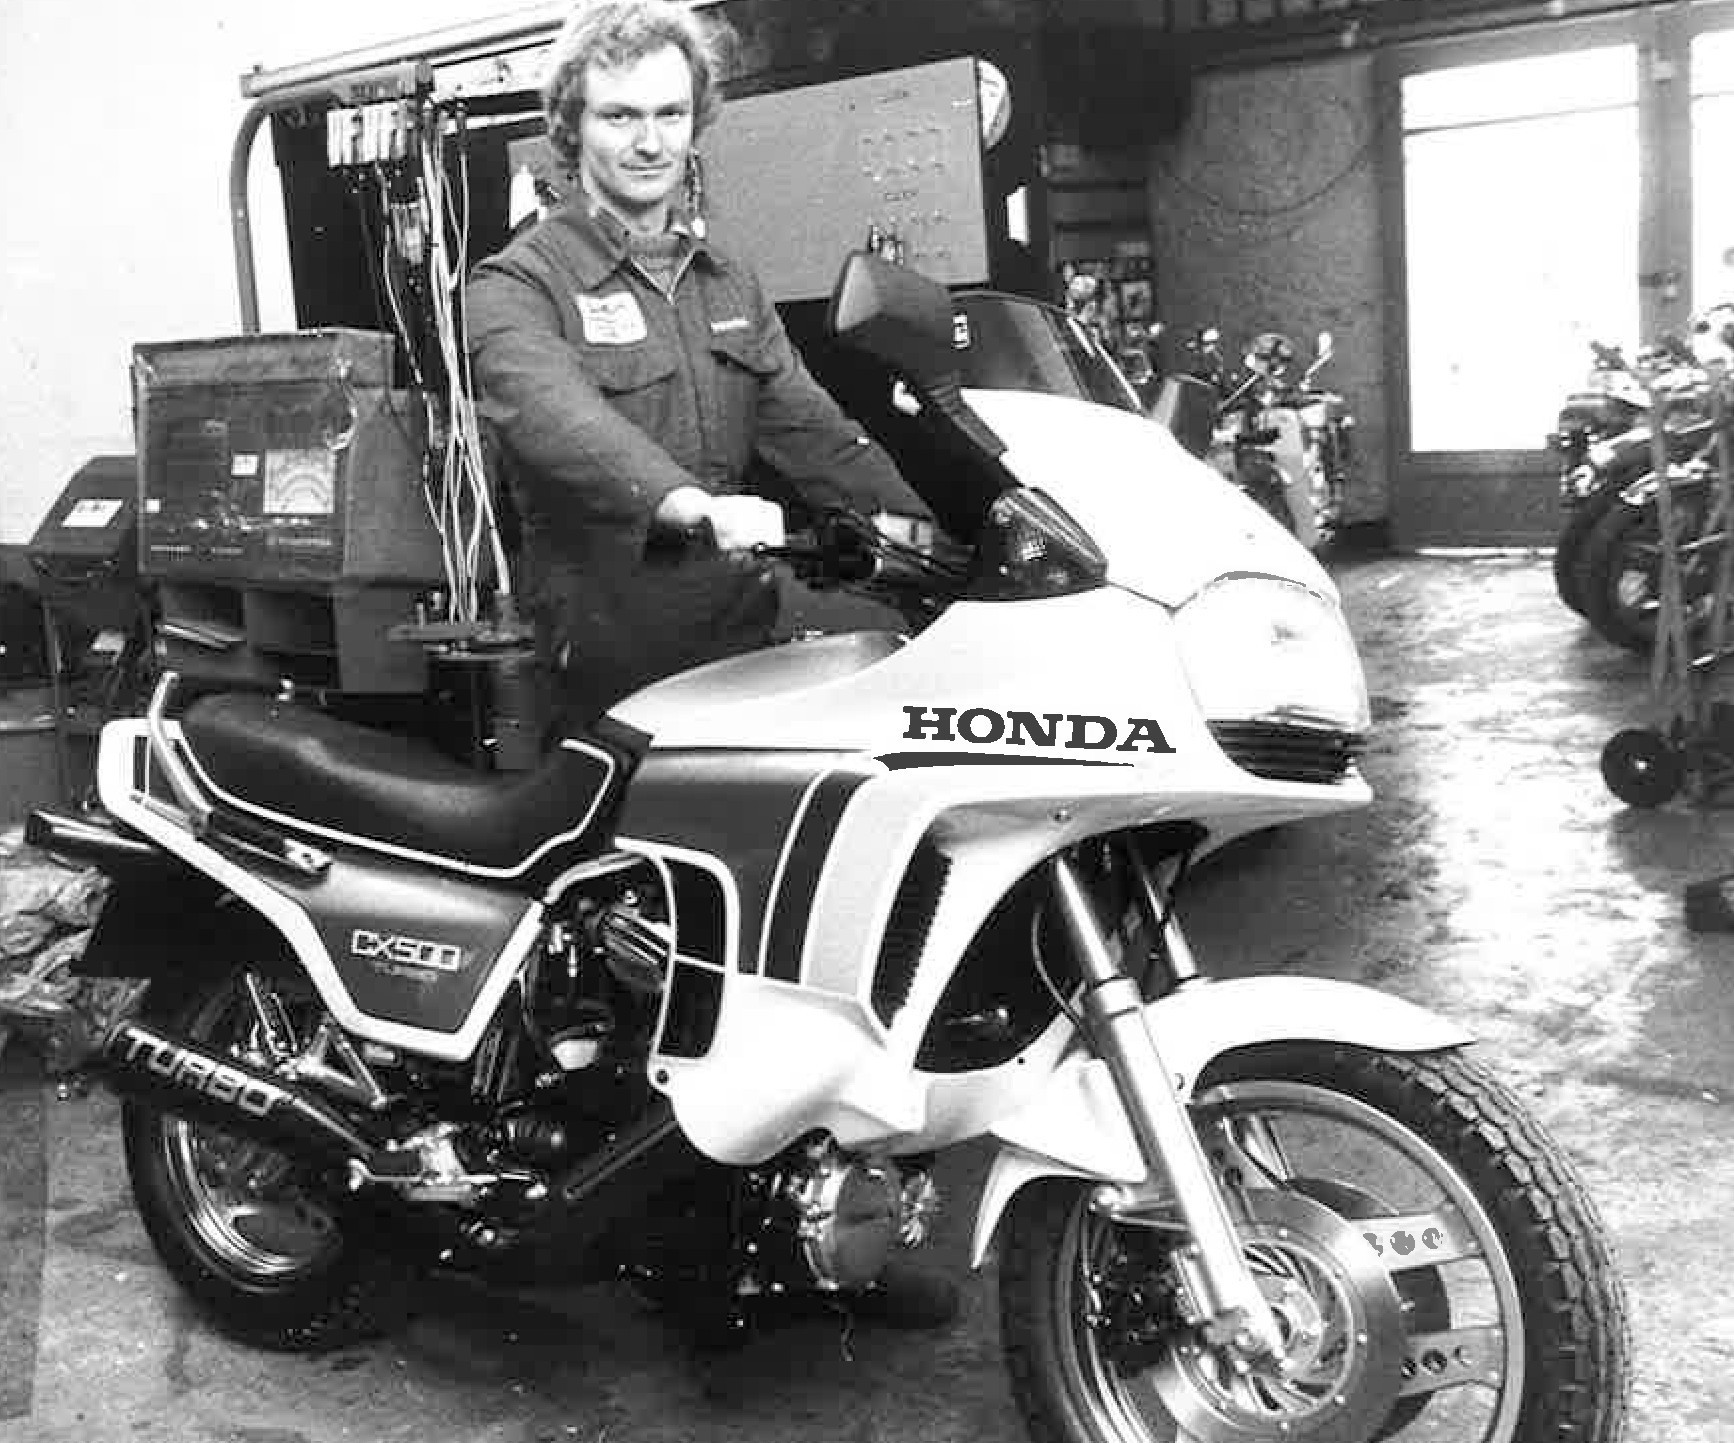 Ian Kirk with a Honda CX 500 Turbo, pictured in 1982